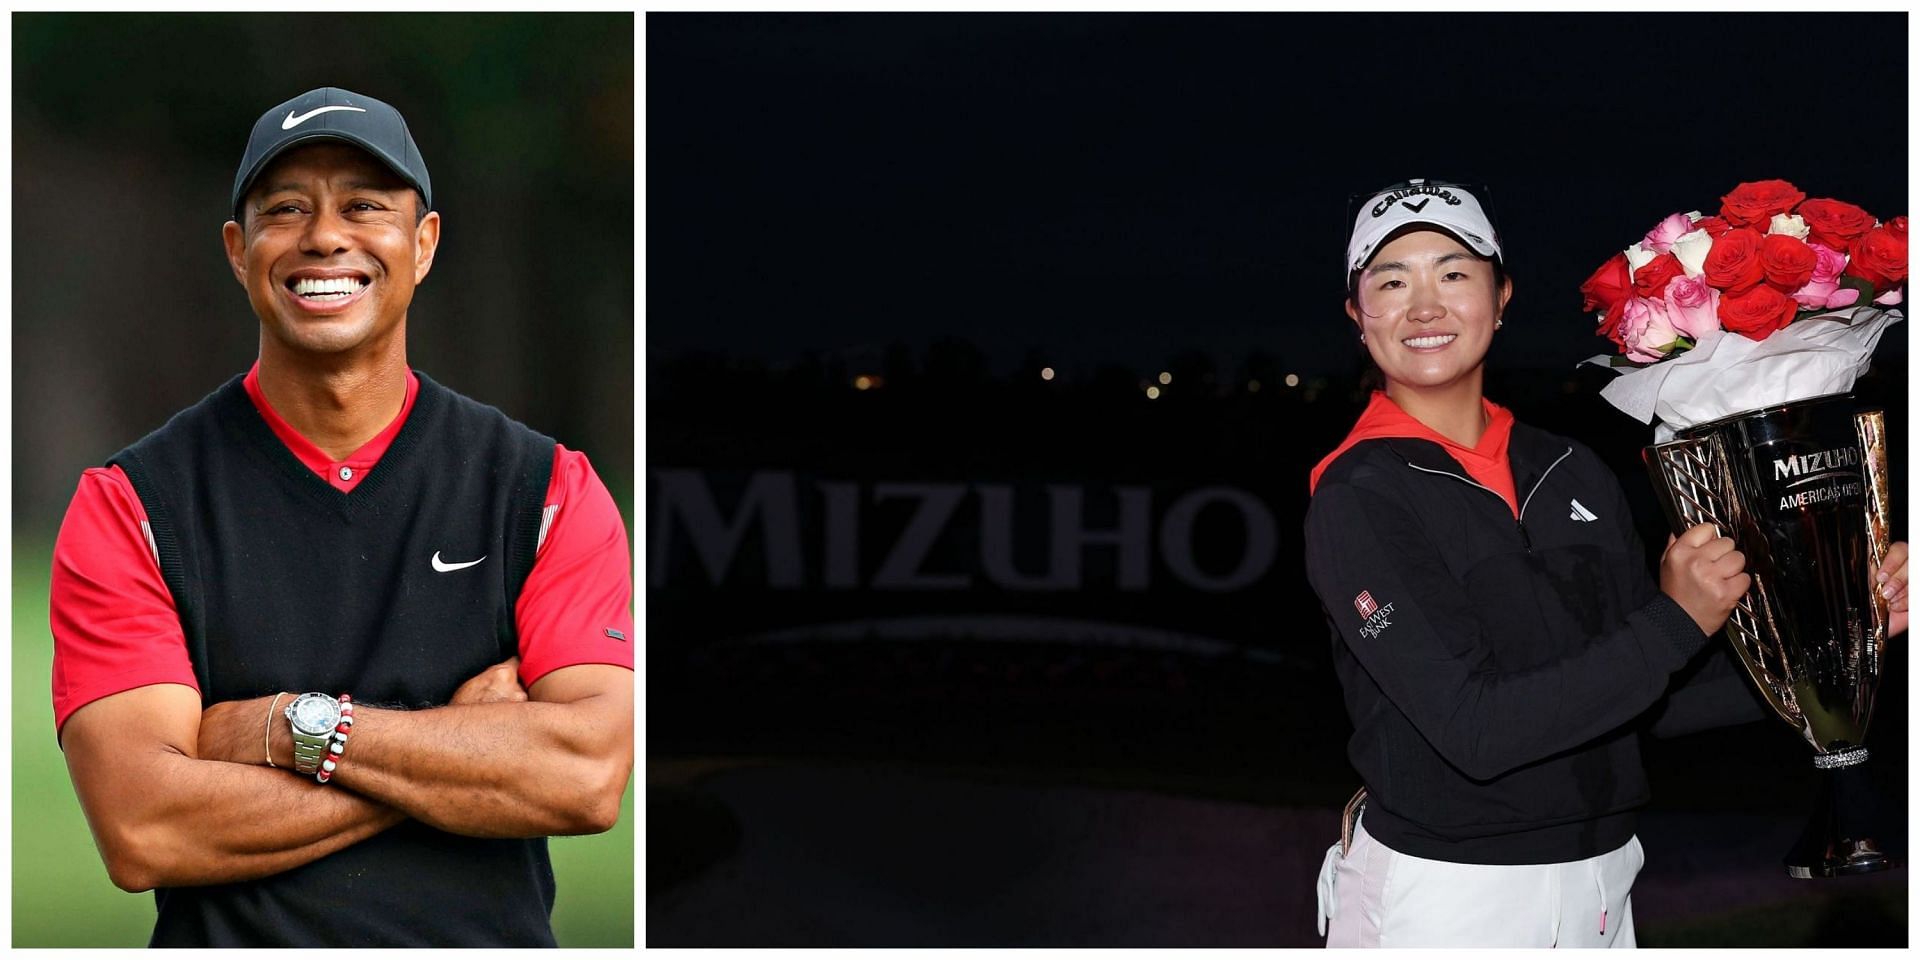 Tiger Woods congratulates Rose Zhang on her victory at Mizuho Americas Open 2023